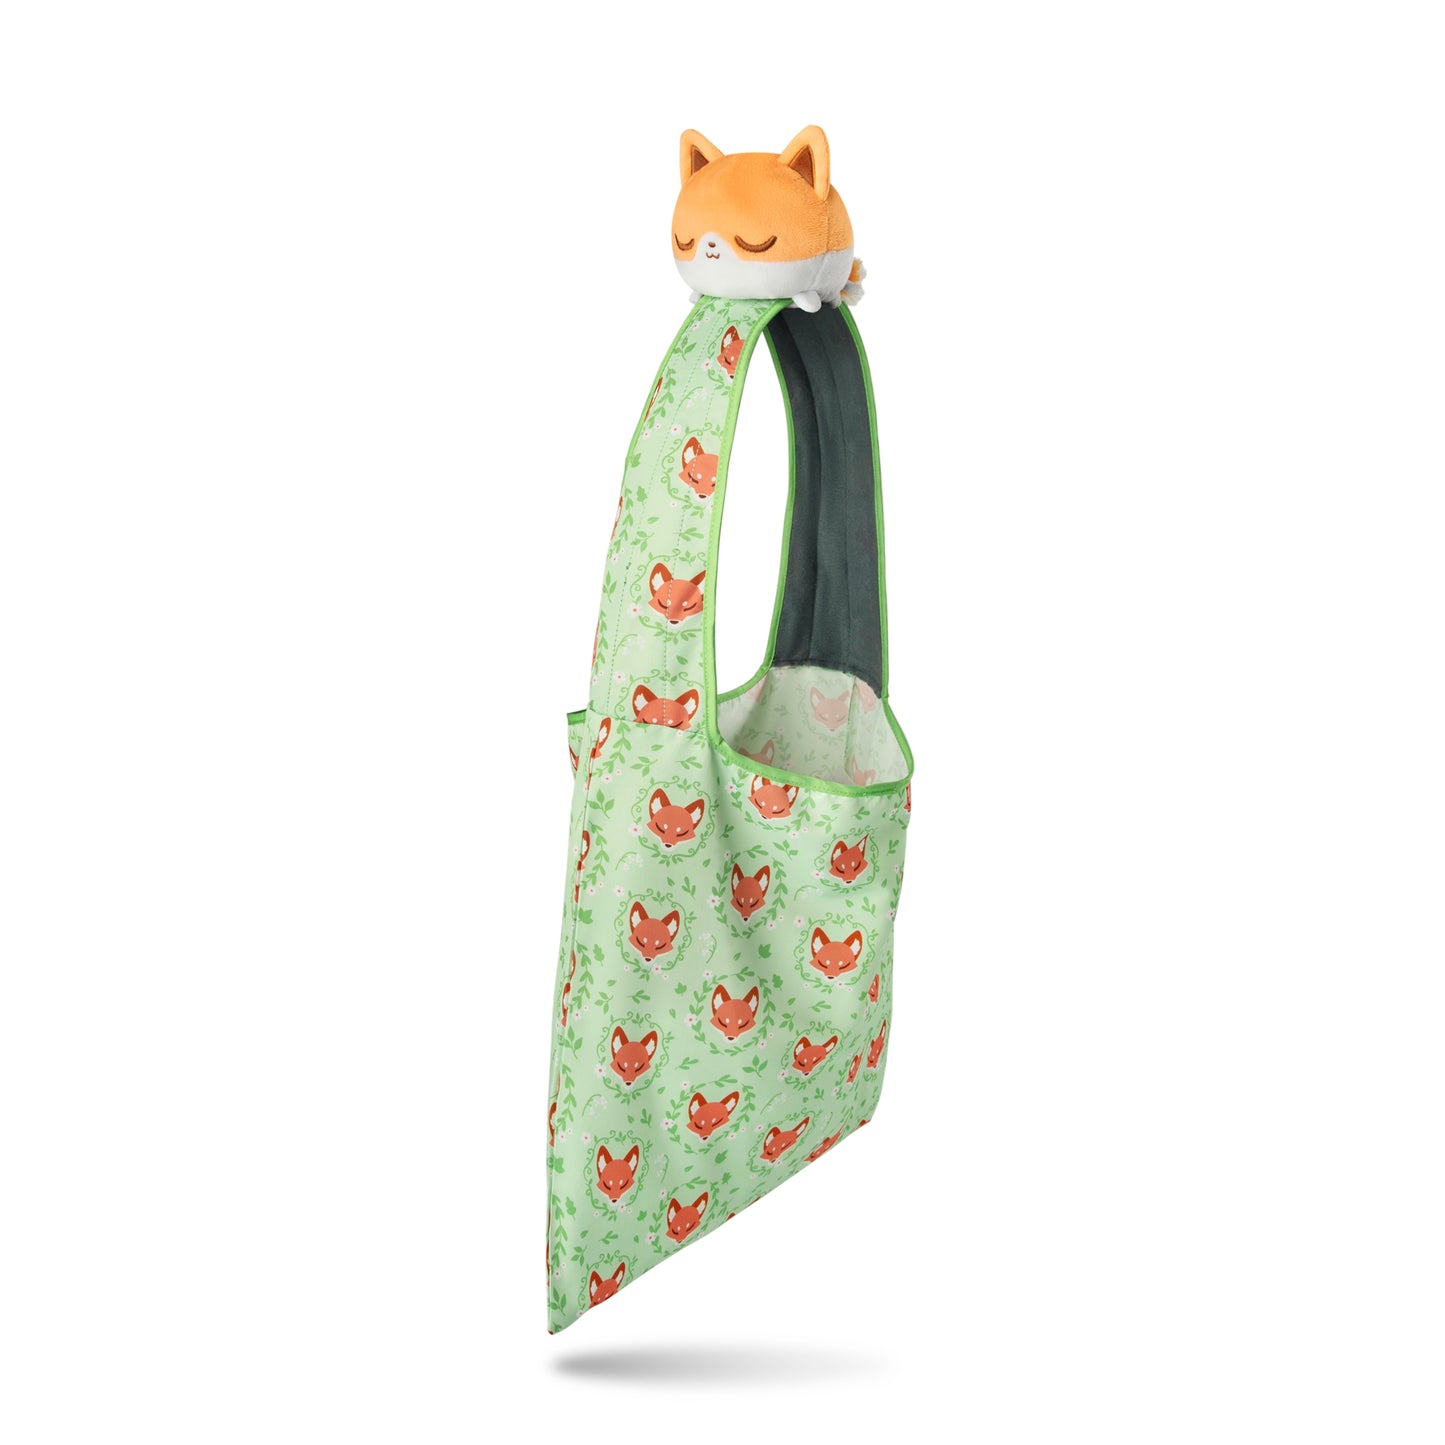 A Plushiverse Floral Fox Plushie Tote Bag by TeeTurtle, perfect for storing TeeTurtle plushies or using as a storage pouch.